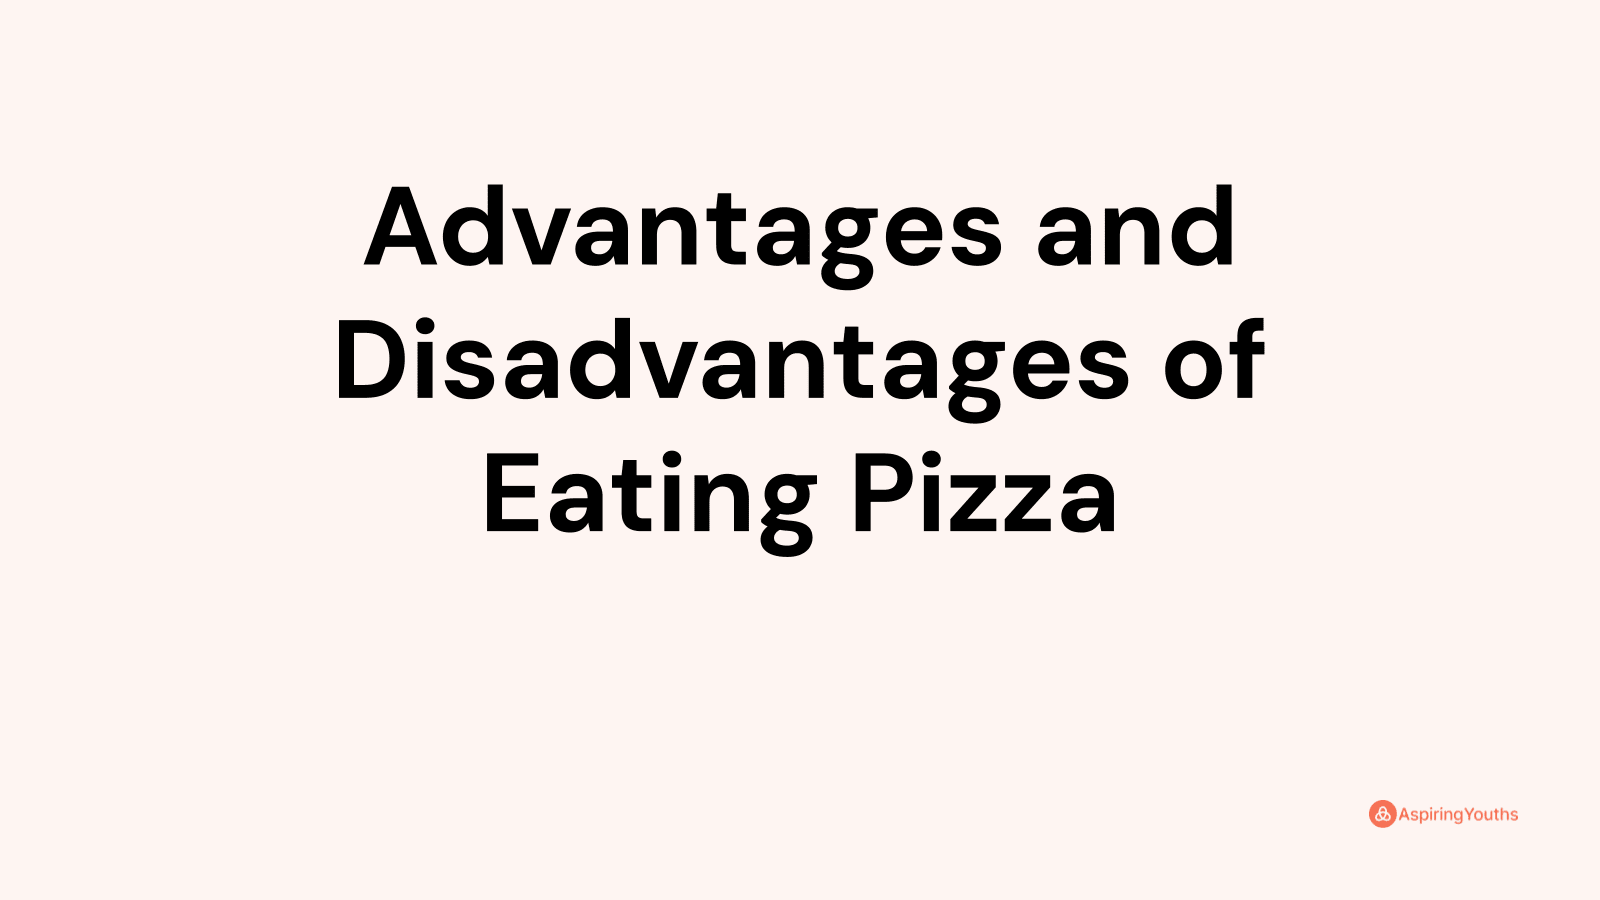 Advantages and disadvantages of Eating Pizza